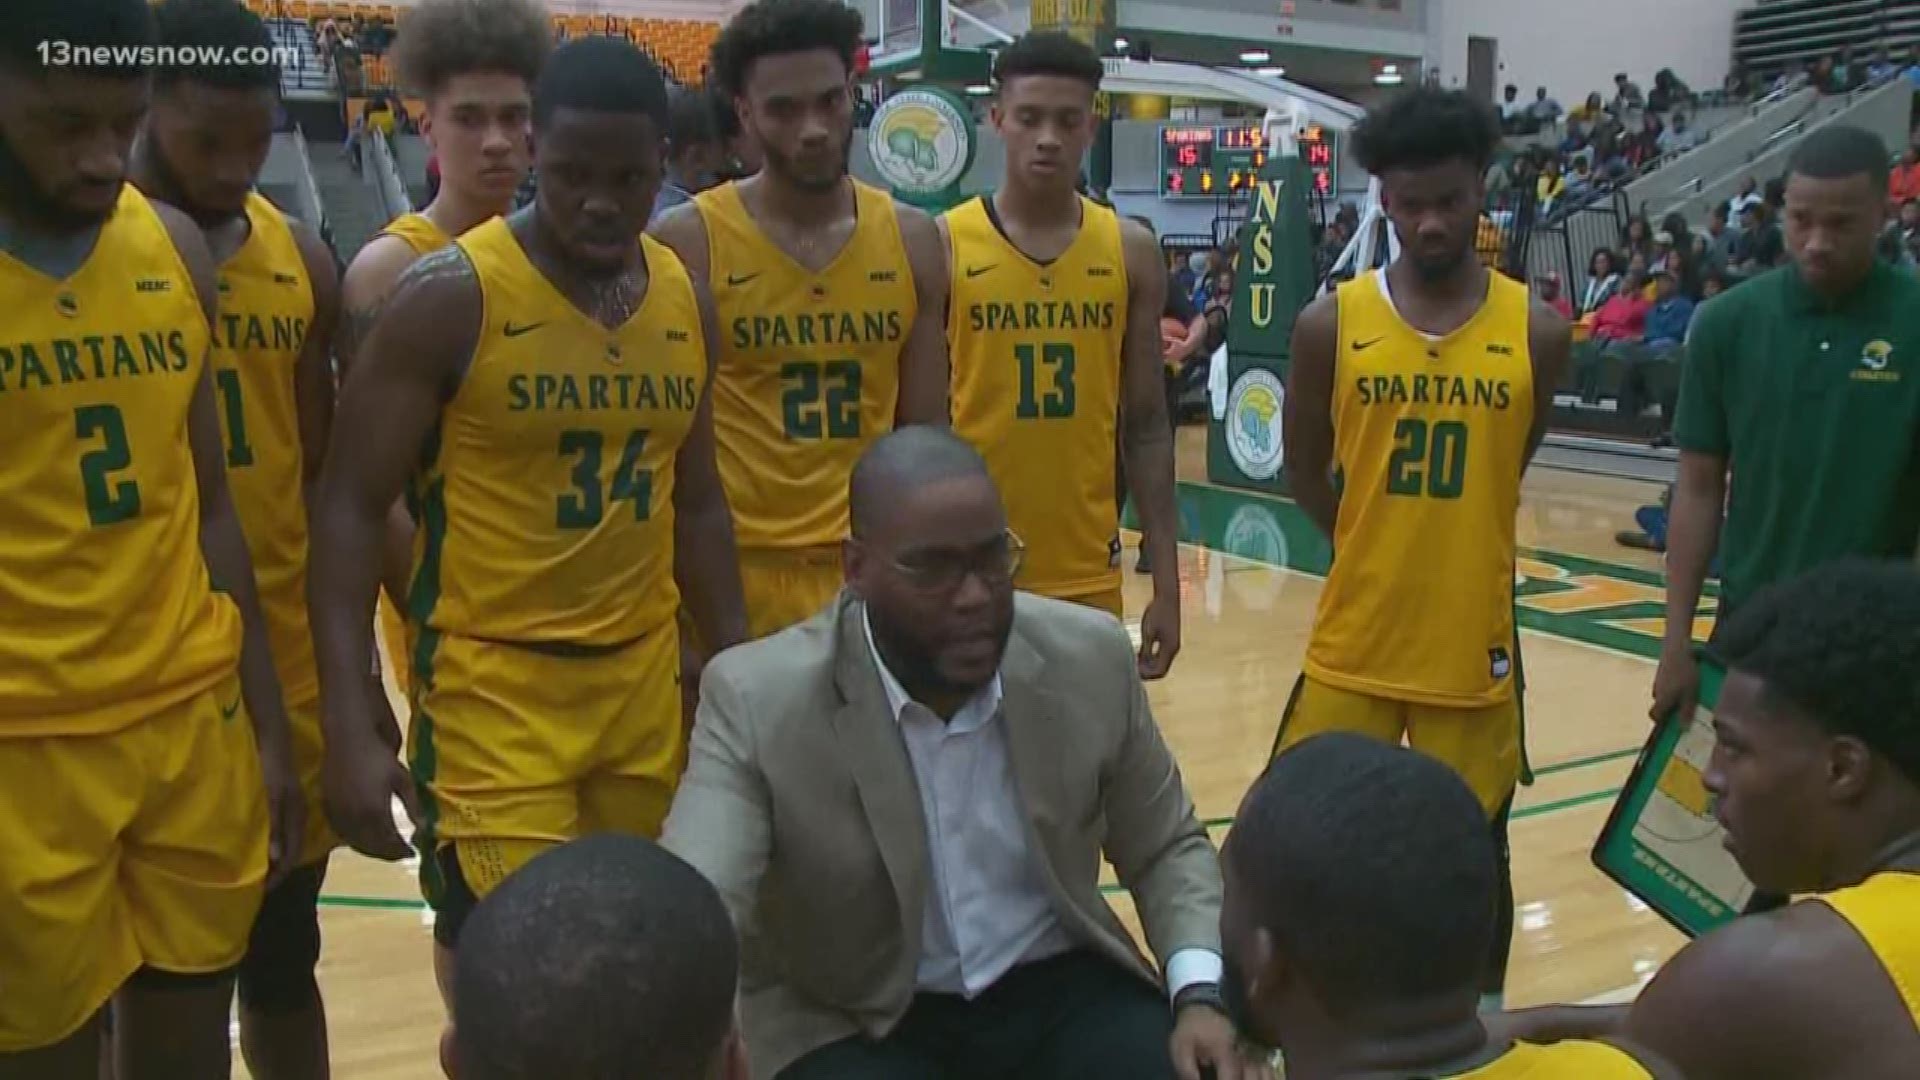 Norfolk State scored 50 points in each half on their way to a 100-59 win over DIII Greensboro College.